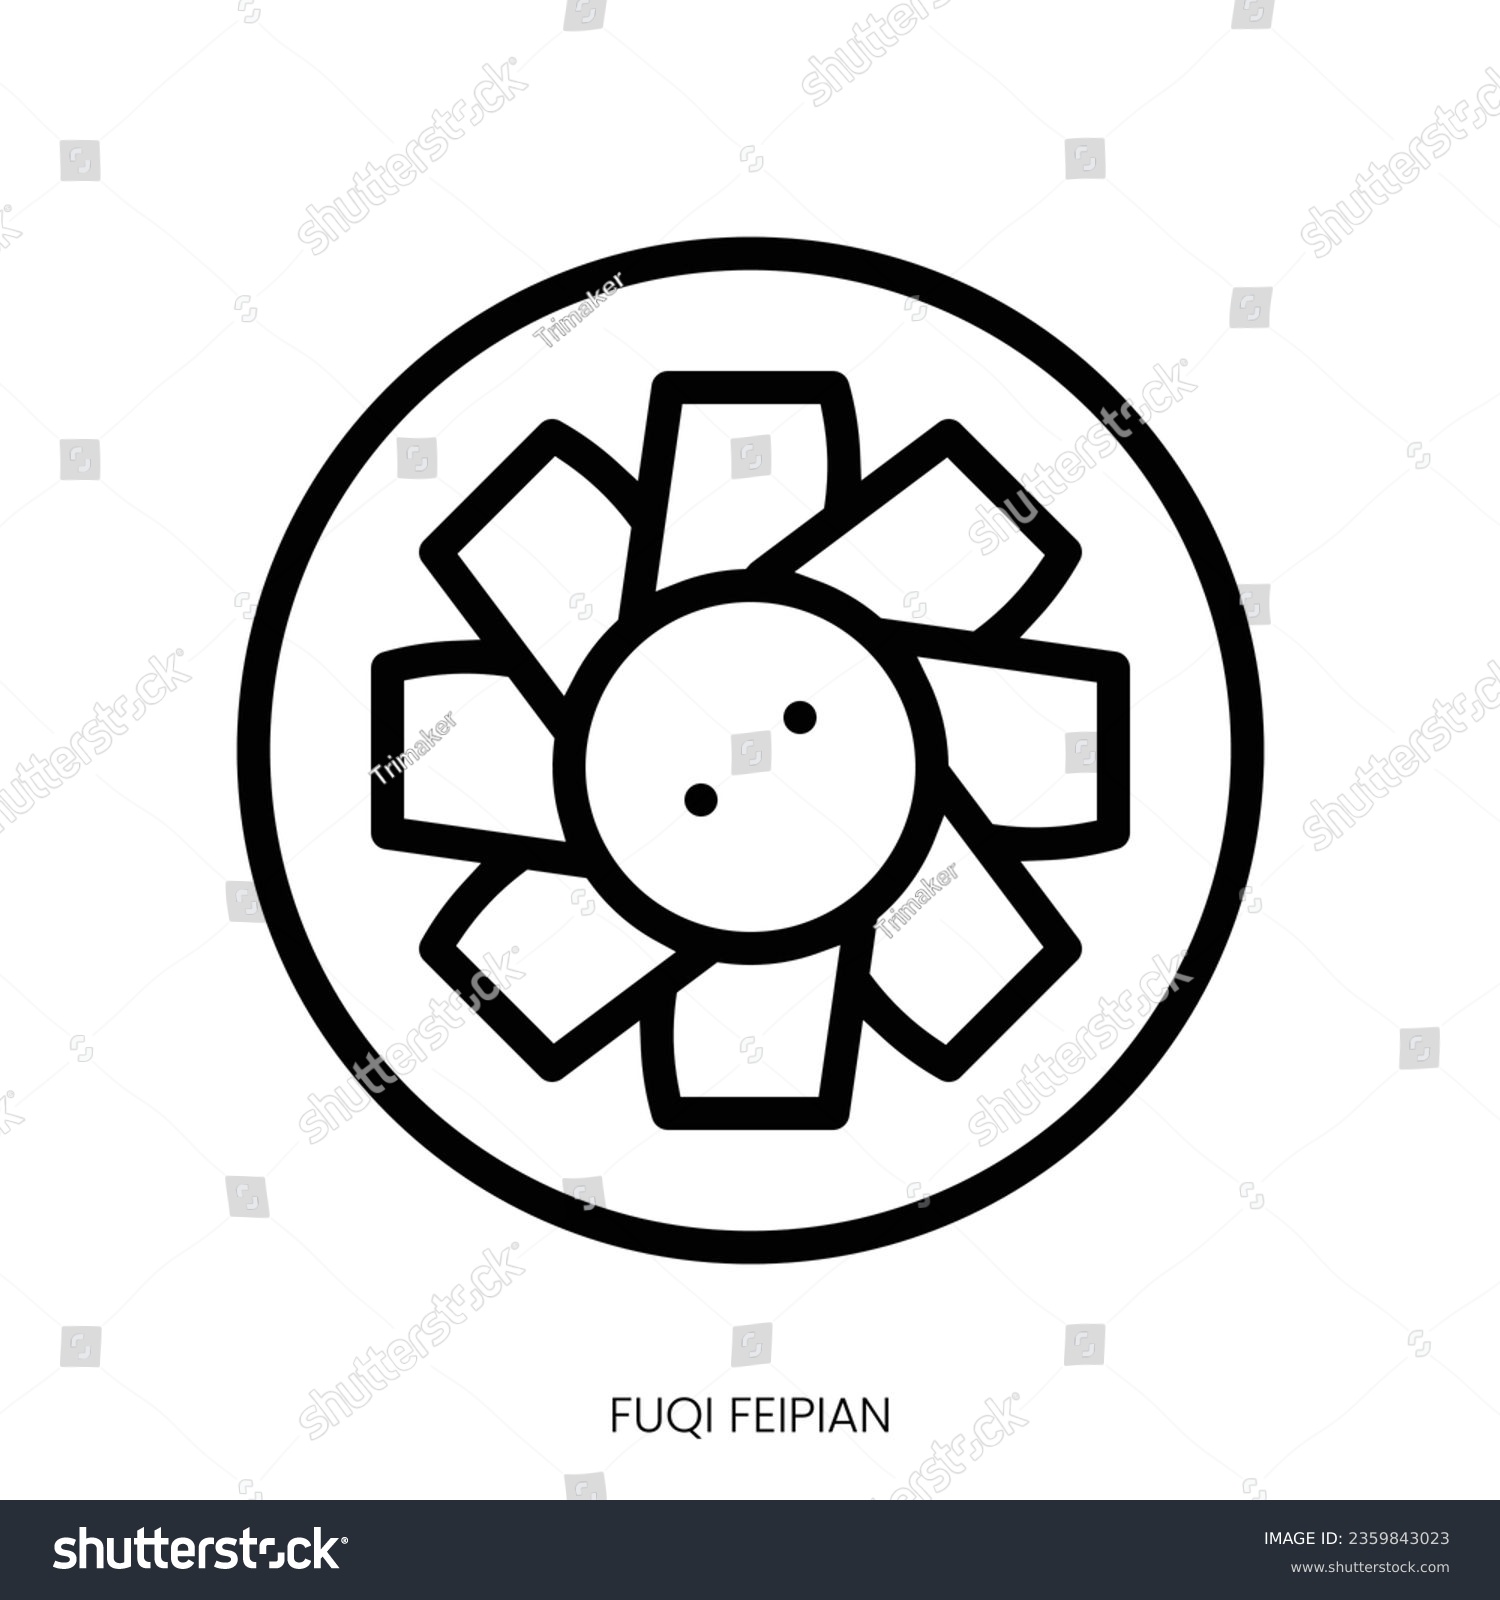 SVG of fuqi feipian icon. Line Art Style Design Isolated On White Background svg